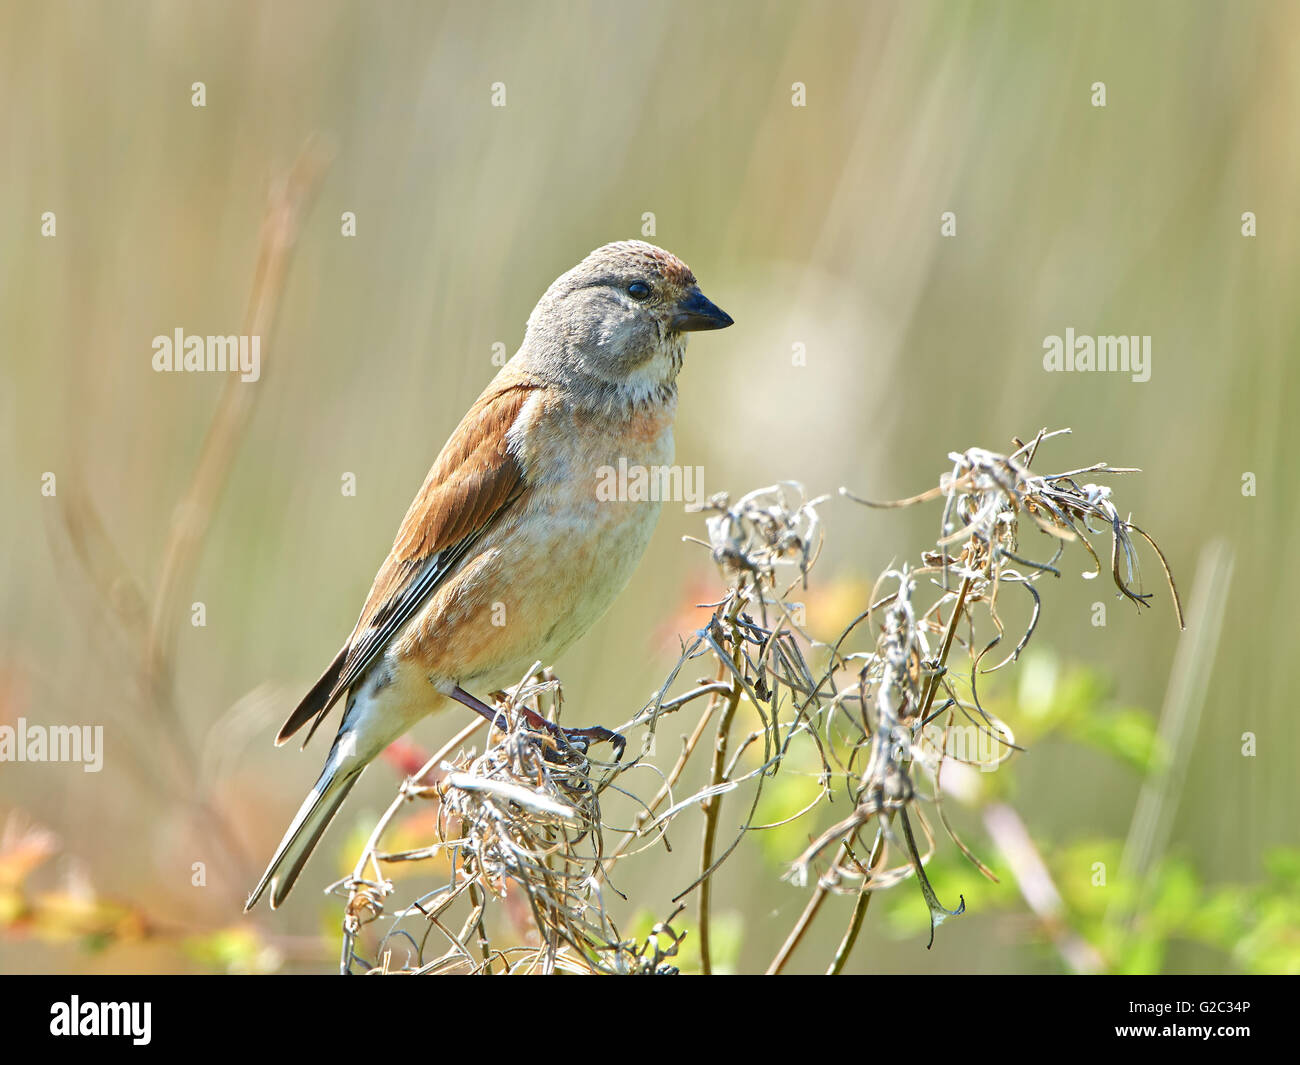 Common linnet resting on a branch in its habitat Stock Photo